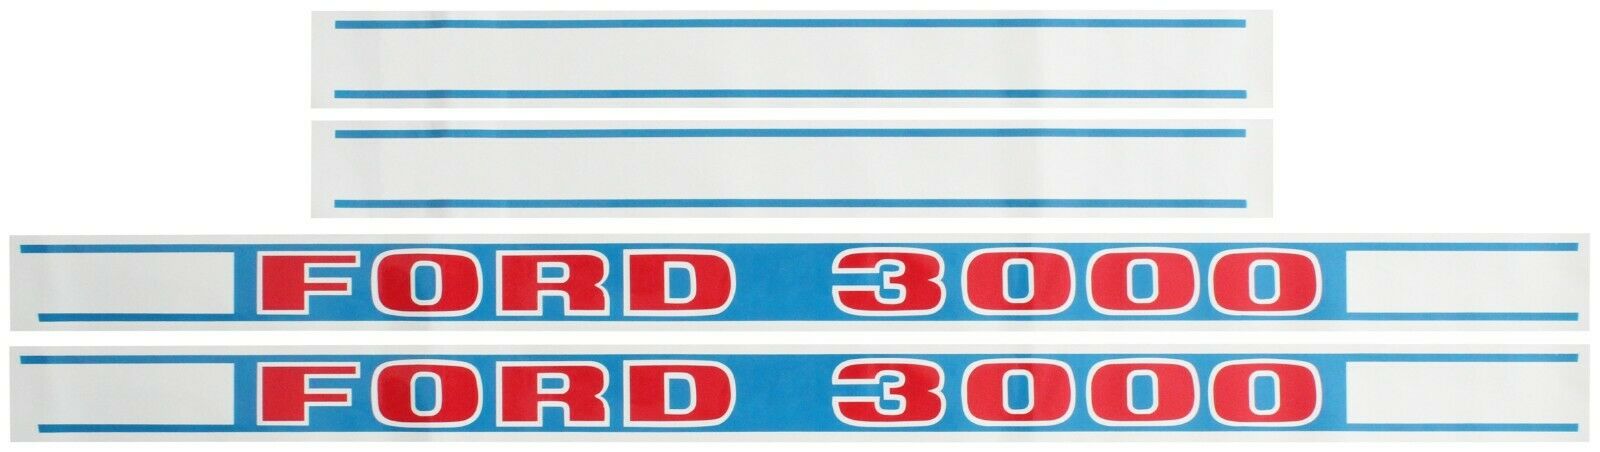 Ford 3000 Tractor Decal Set Sps Parts